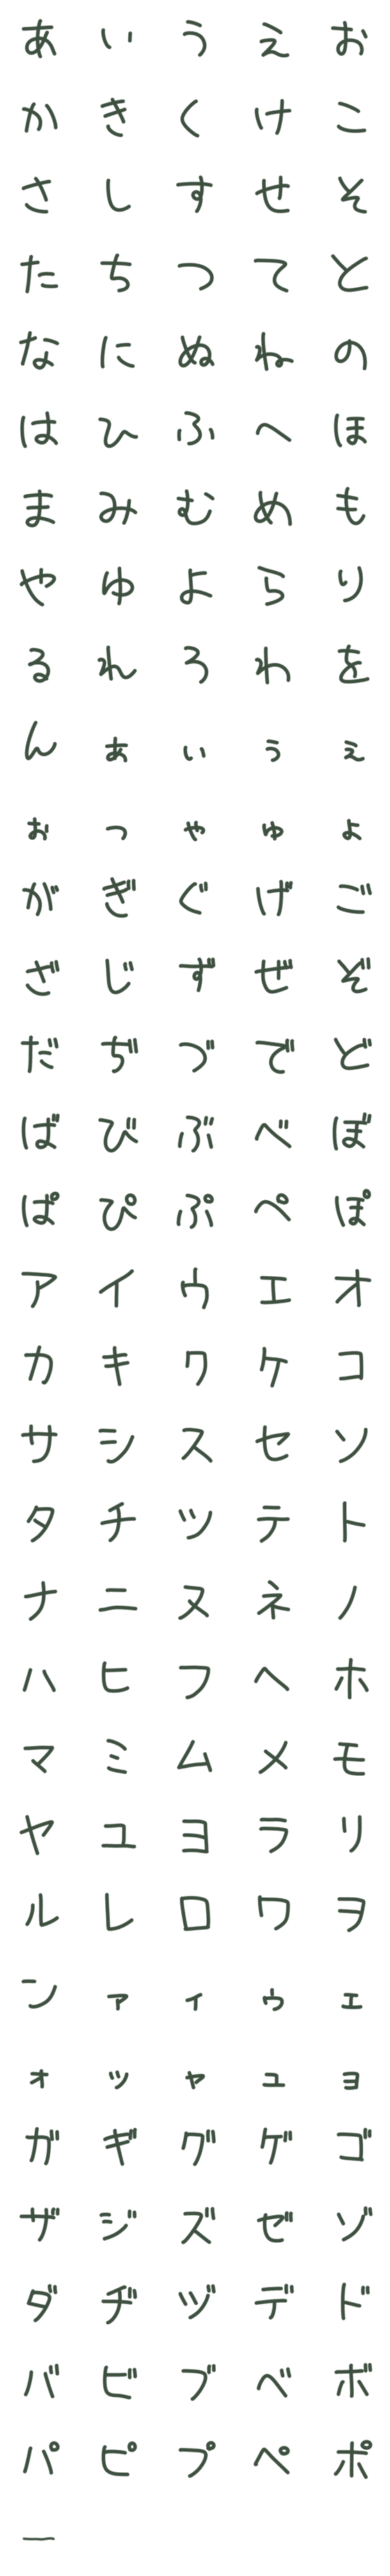 [LINE絵文字]おおしろの字の画像一覧